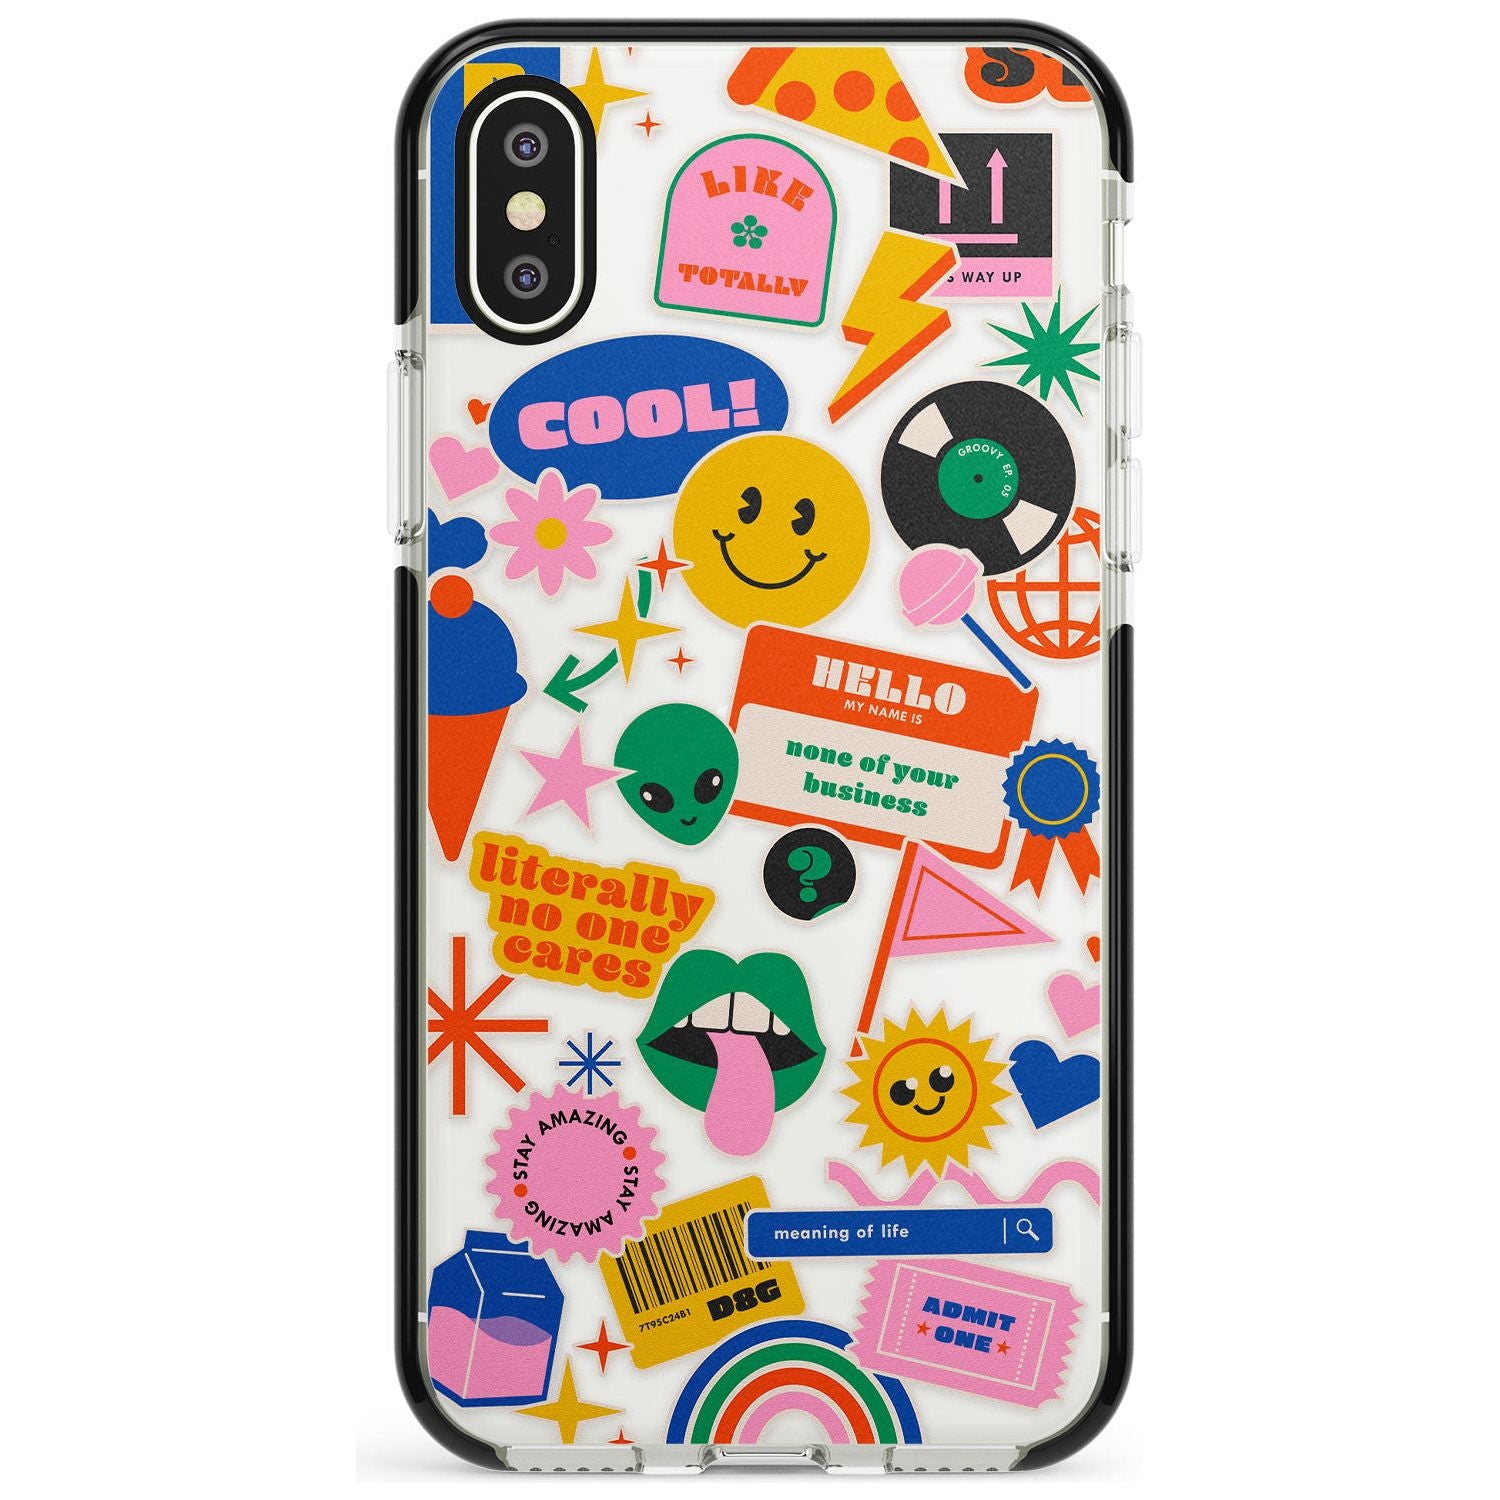 Nostalgic Stickers #1 Pink Fade Impact Phone Case for iPhone X XS Max XR